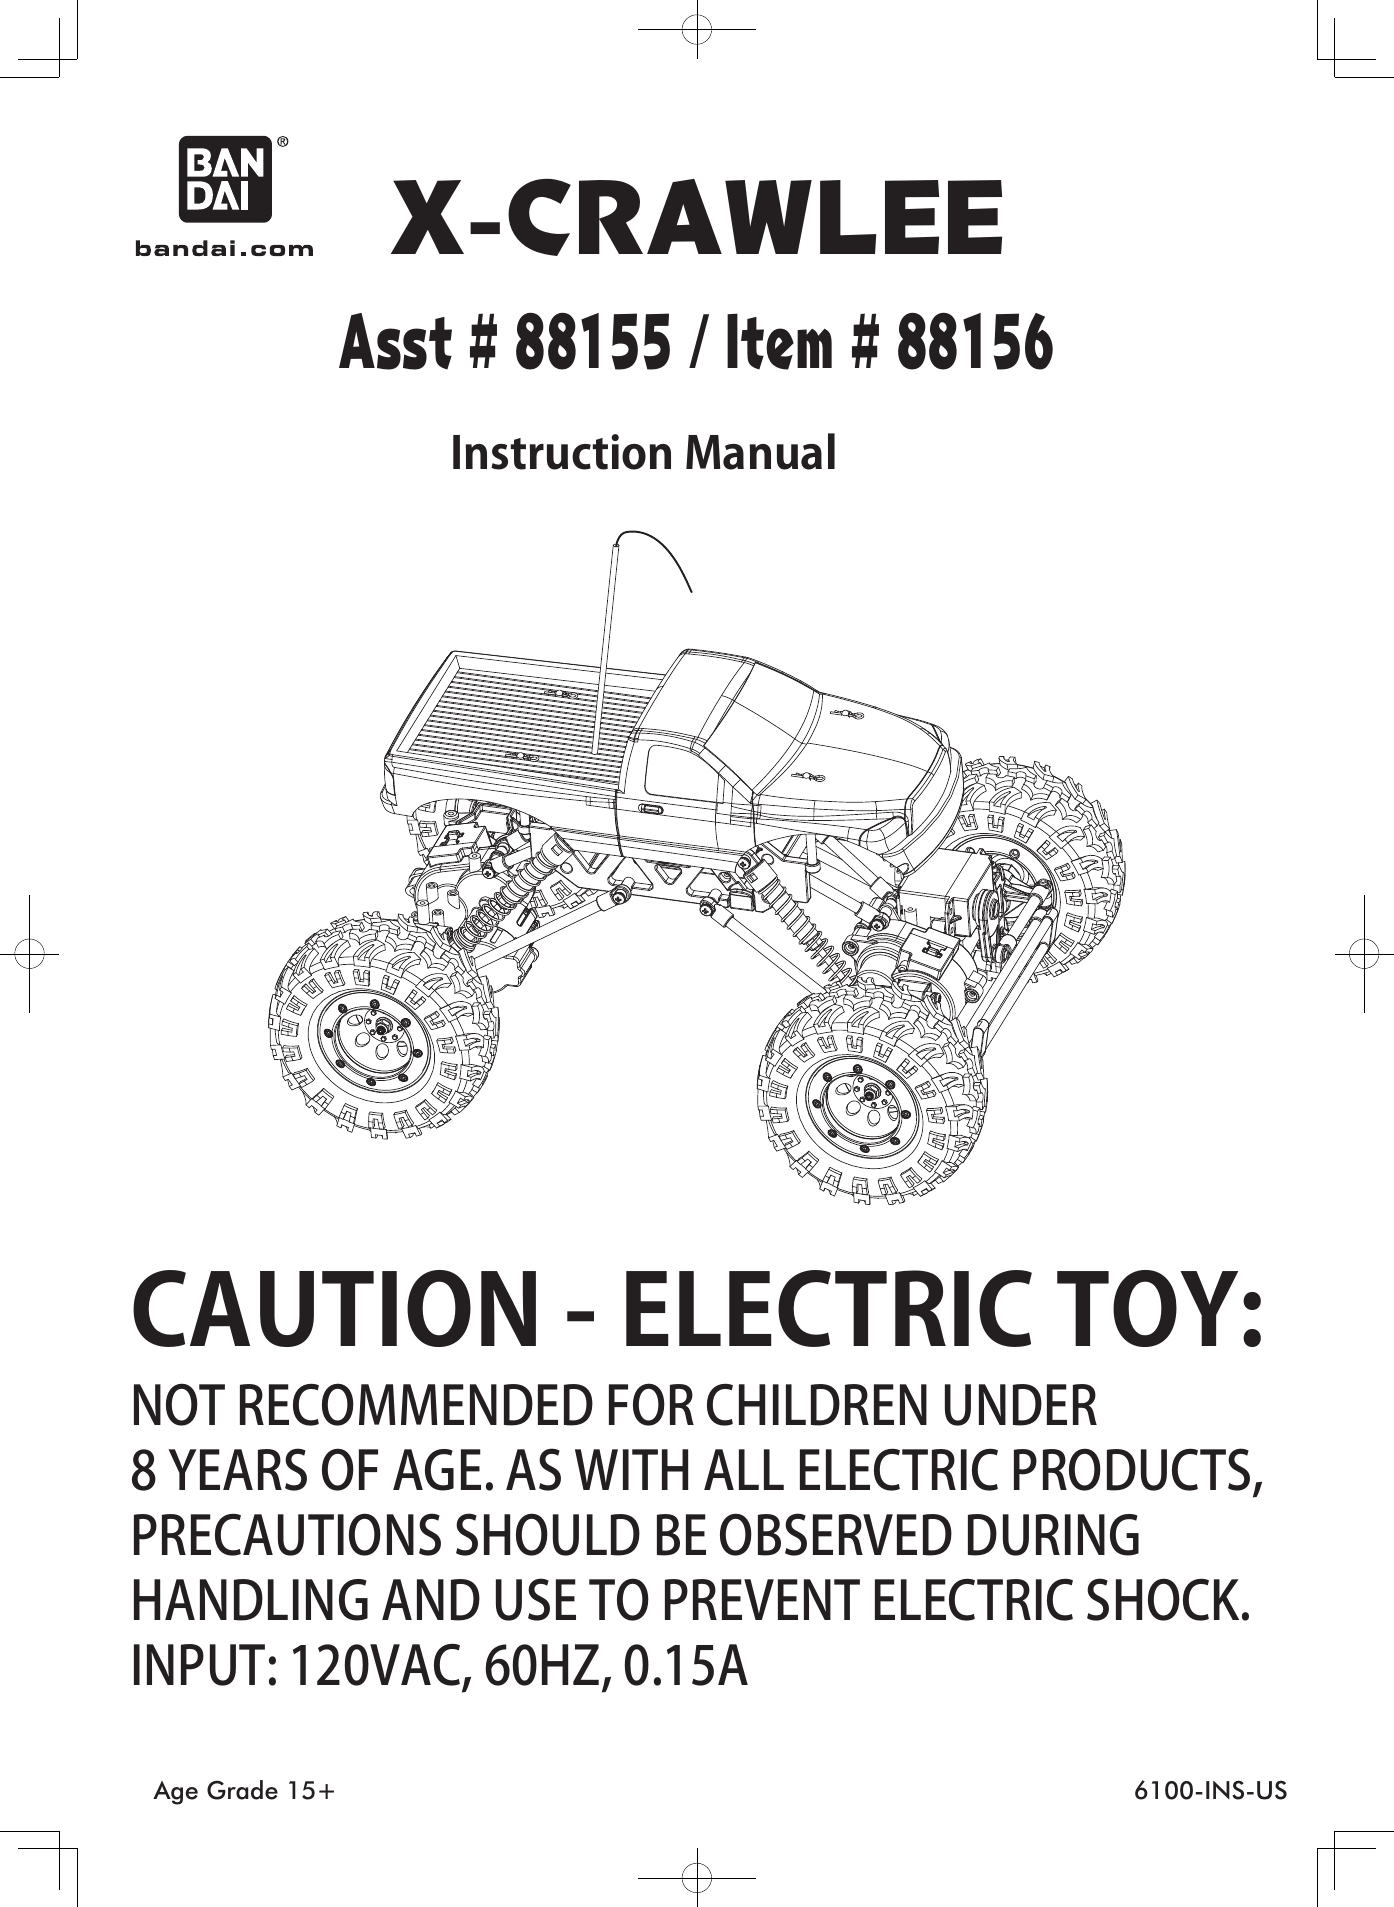 X-CRAWLEEAsst # 88155 / Item # 88156CAUTION - ELECTRIC TOY:NOT RECOMMENDED FOR CHILDREN UNDER8 YEARS OF AGE. AS WITH ALL ELECTRIC PRODUCTS,PRECAUTIONS SHOULD BE OBSERVED DURINGHANDLING AND USE TO PREVENT ELECTRIC SHOCK.INPUT: 120VAC, 60HZ, 0.15AInstruction ManualAge Grade 15+ 6100-INS-US